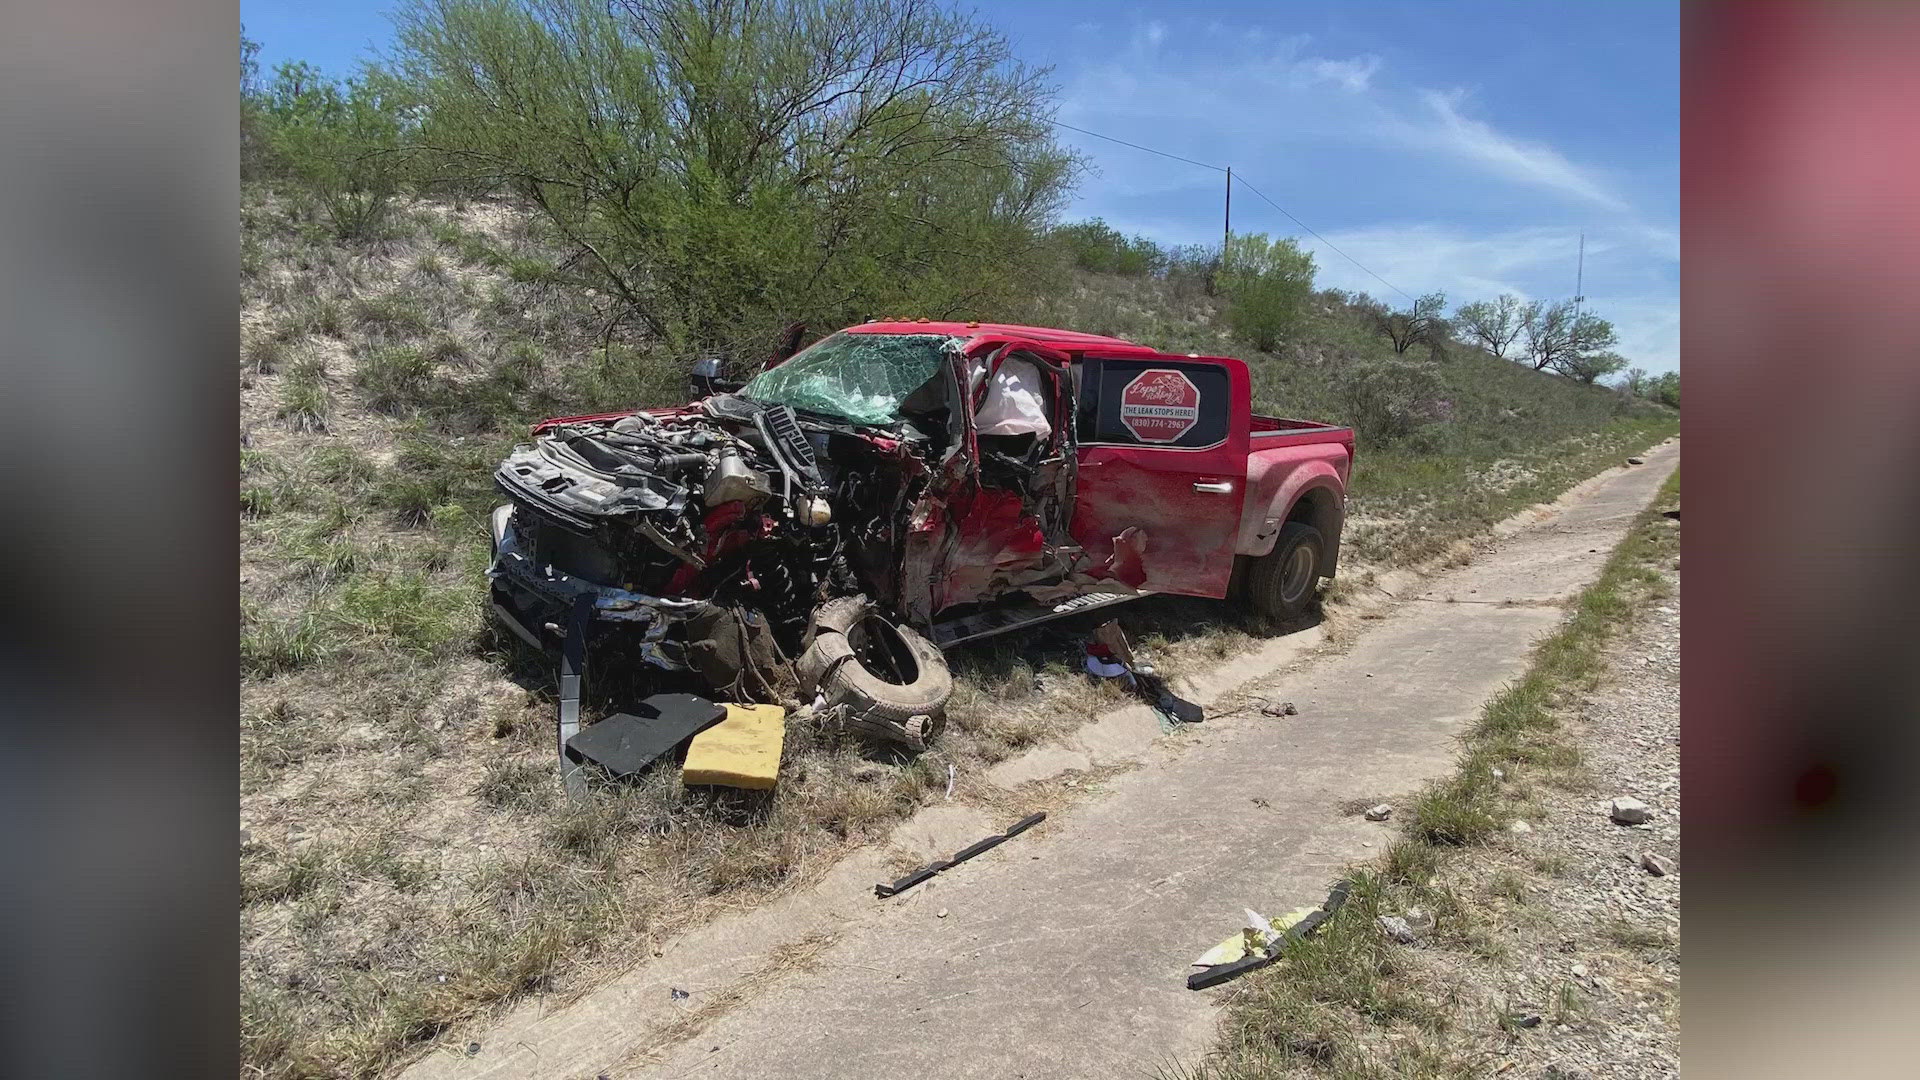 44-year-old Jeremy Randolph was killed in the crash after a truck traveling in the opposite direction had a tire blowout, causing it to veer into the wrong side.